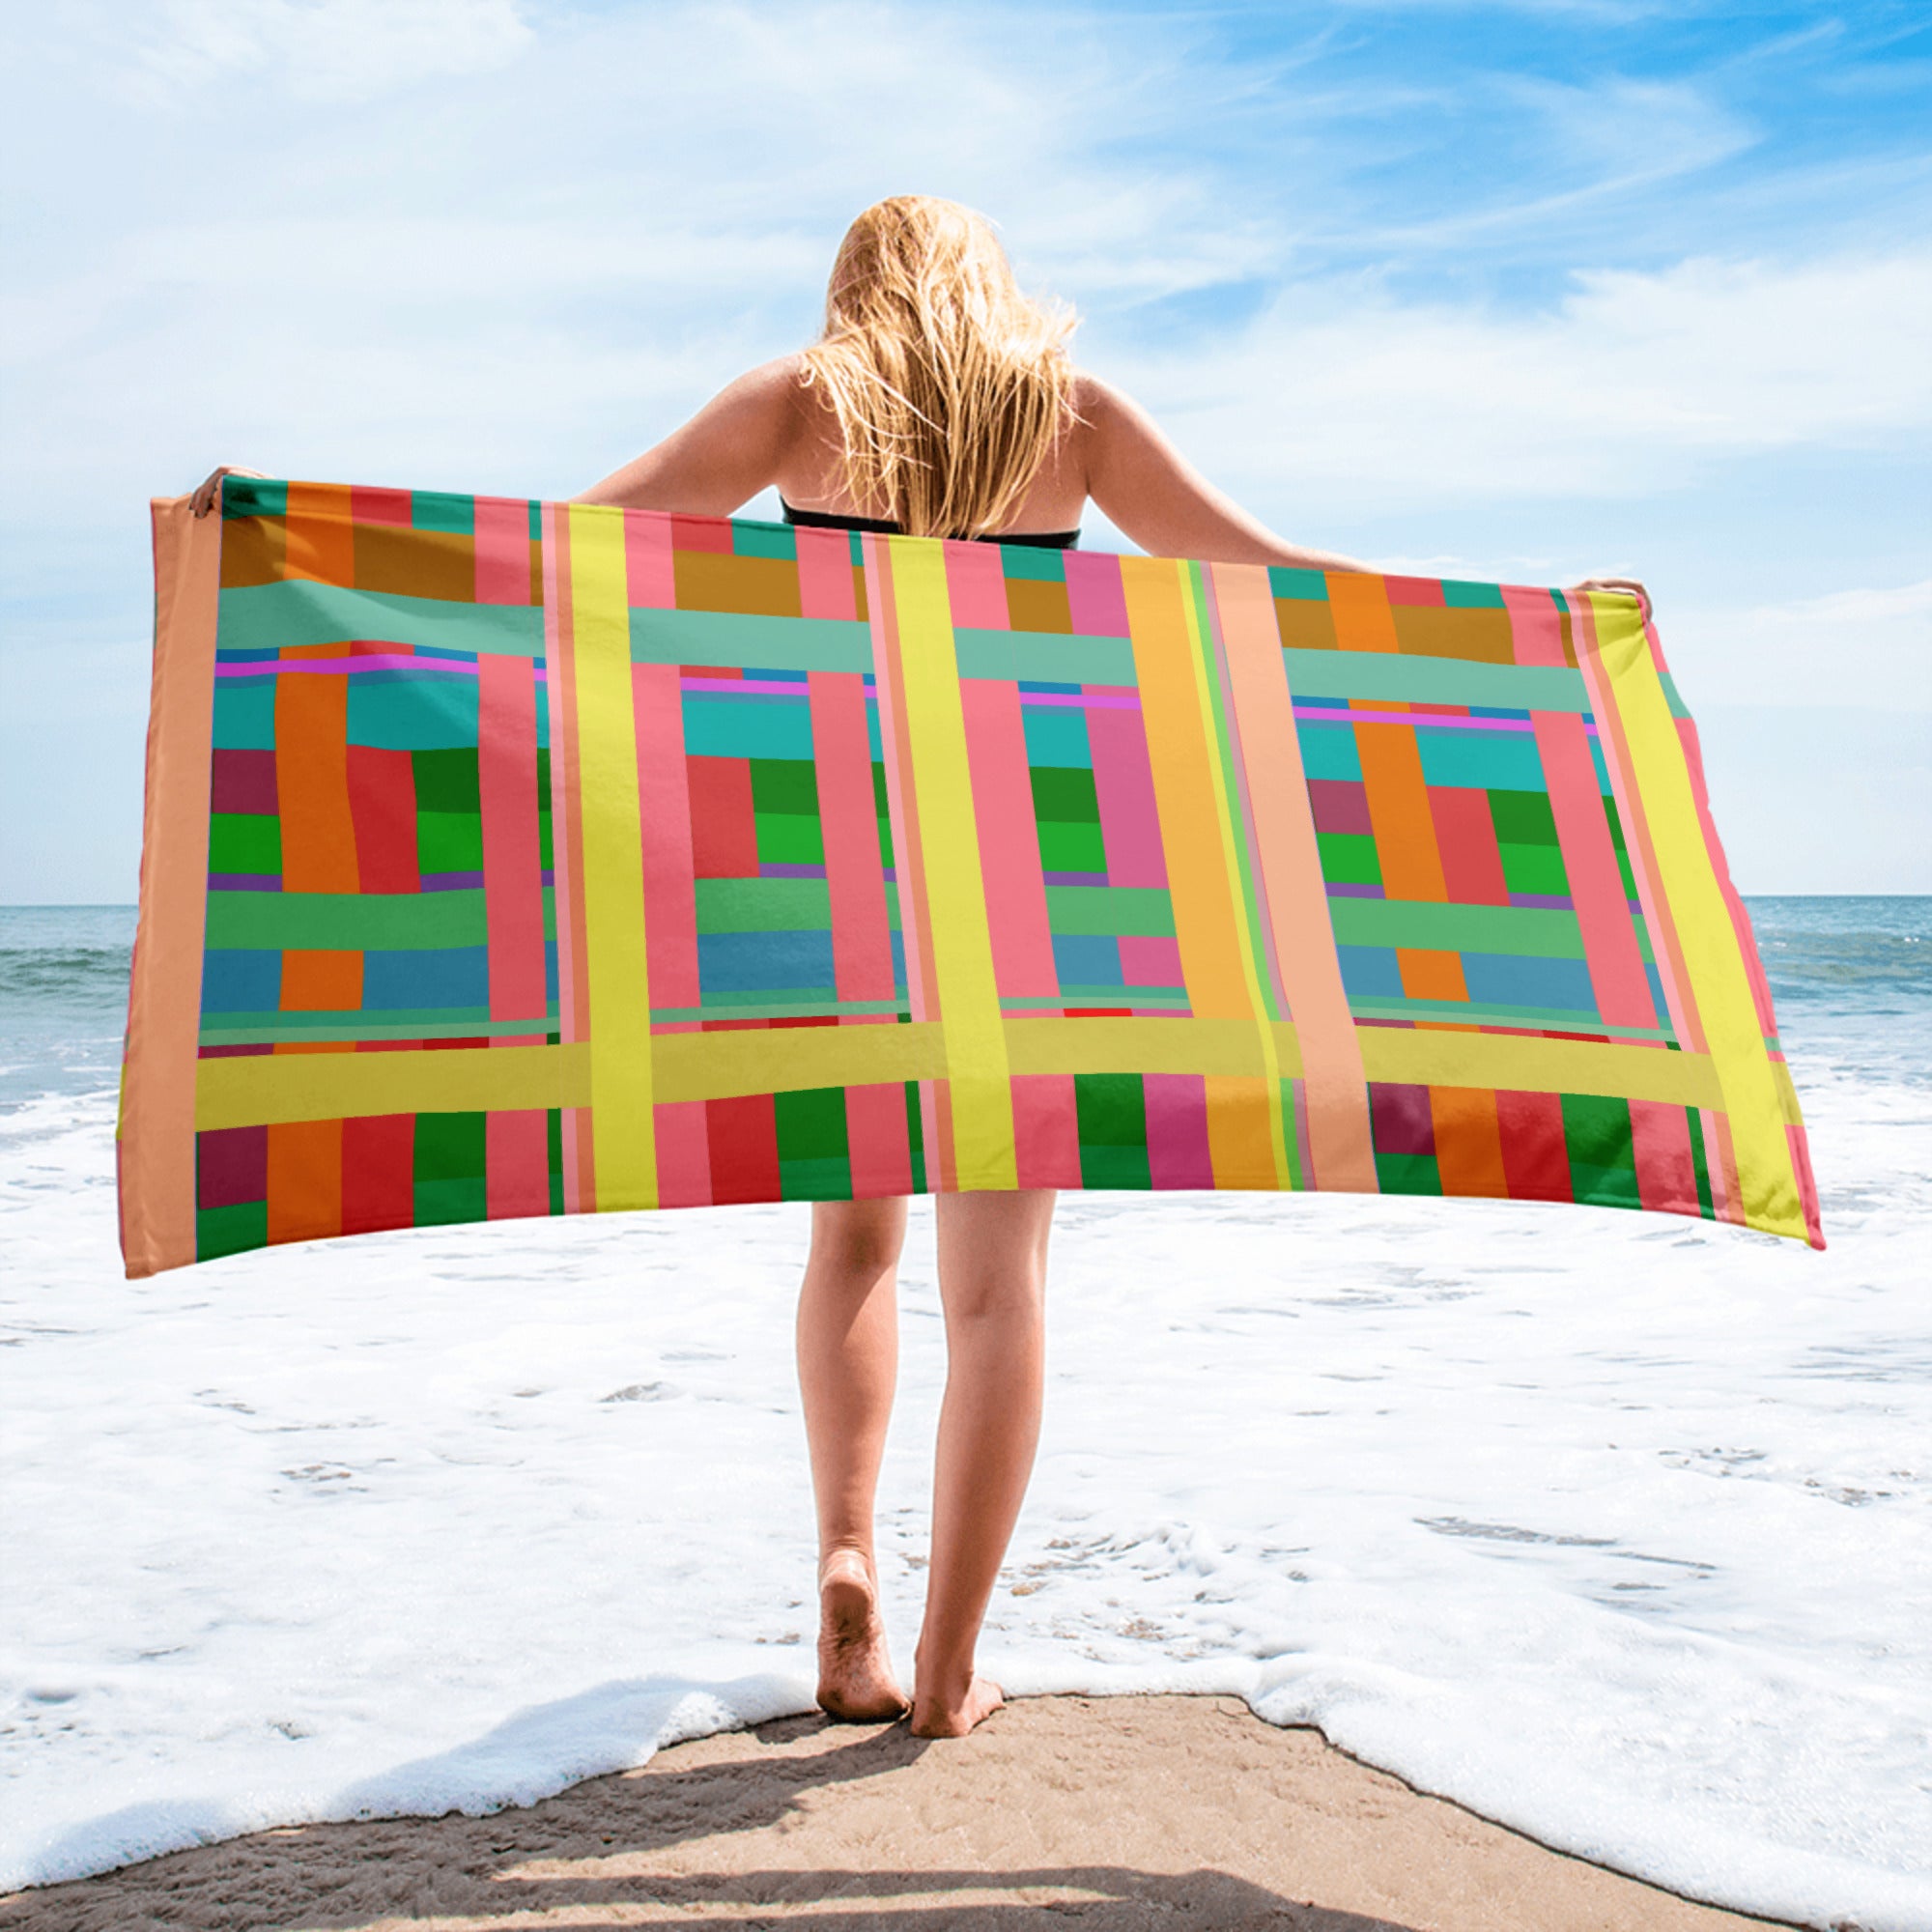 Psychedelic Prism Bath Towel featuring a kaleidoscope of colors for a vibrant bathroom look.